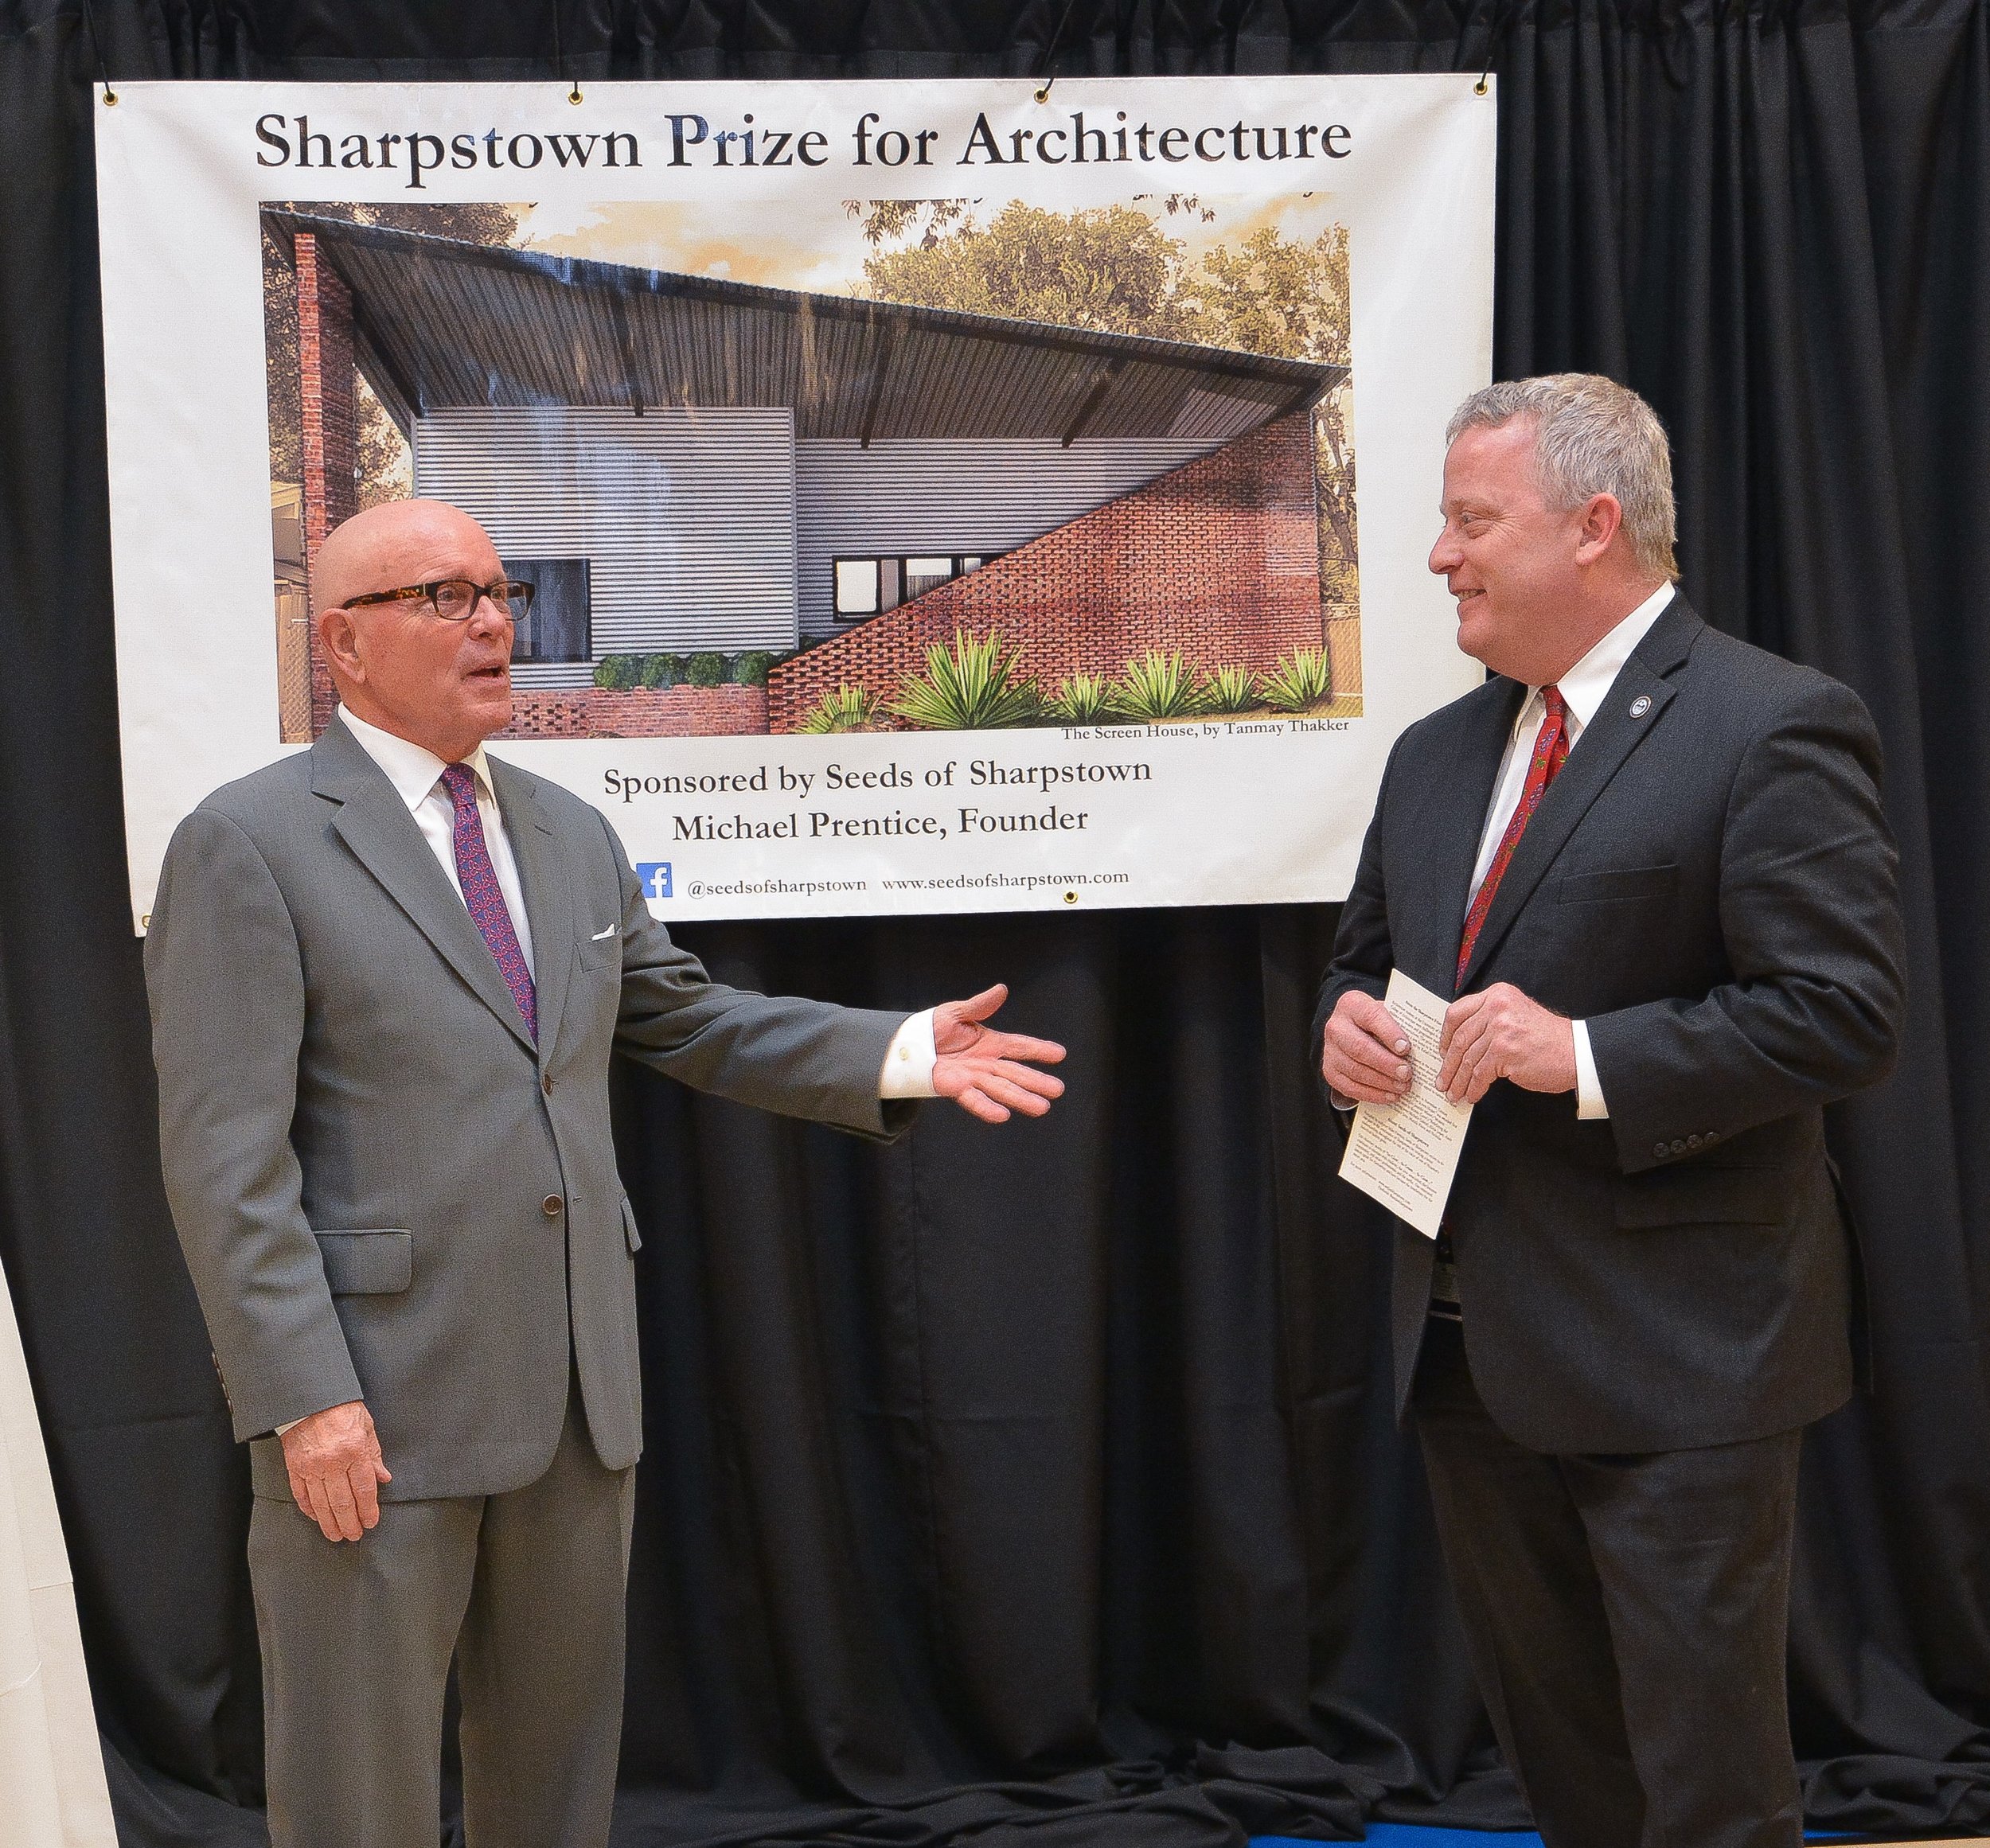   Michael Prentice is joined by Houston City Councilman David Robinson during remarks at the Sharpstown Prize for Architecture exhibition.  